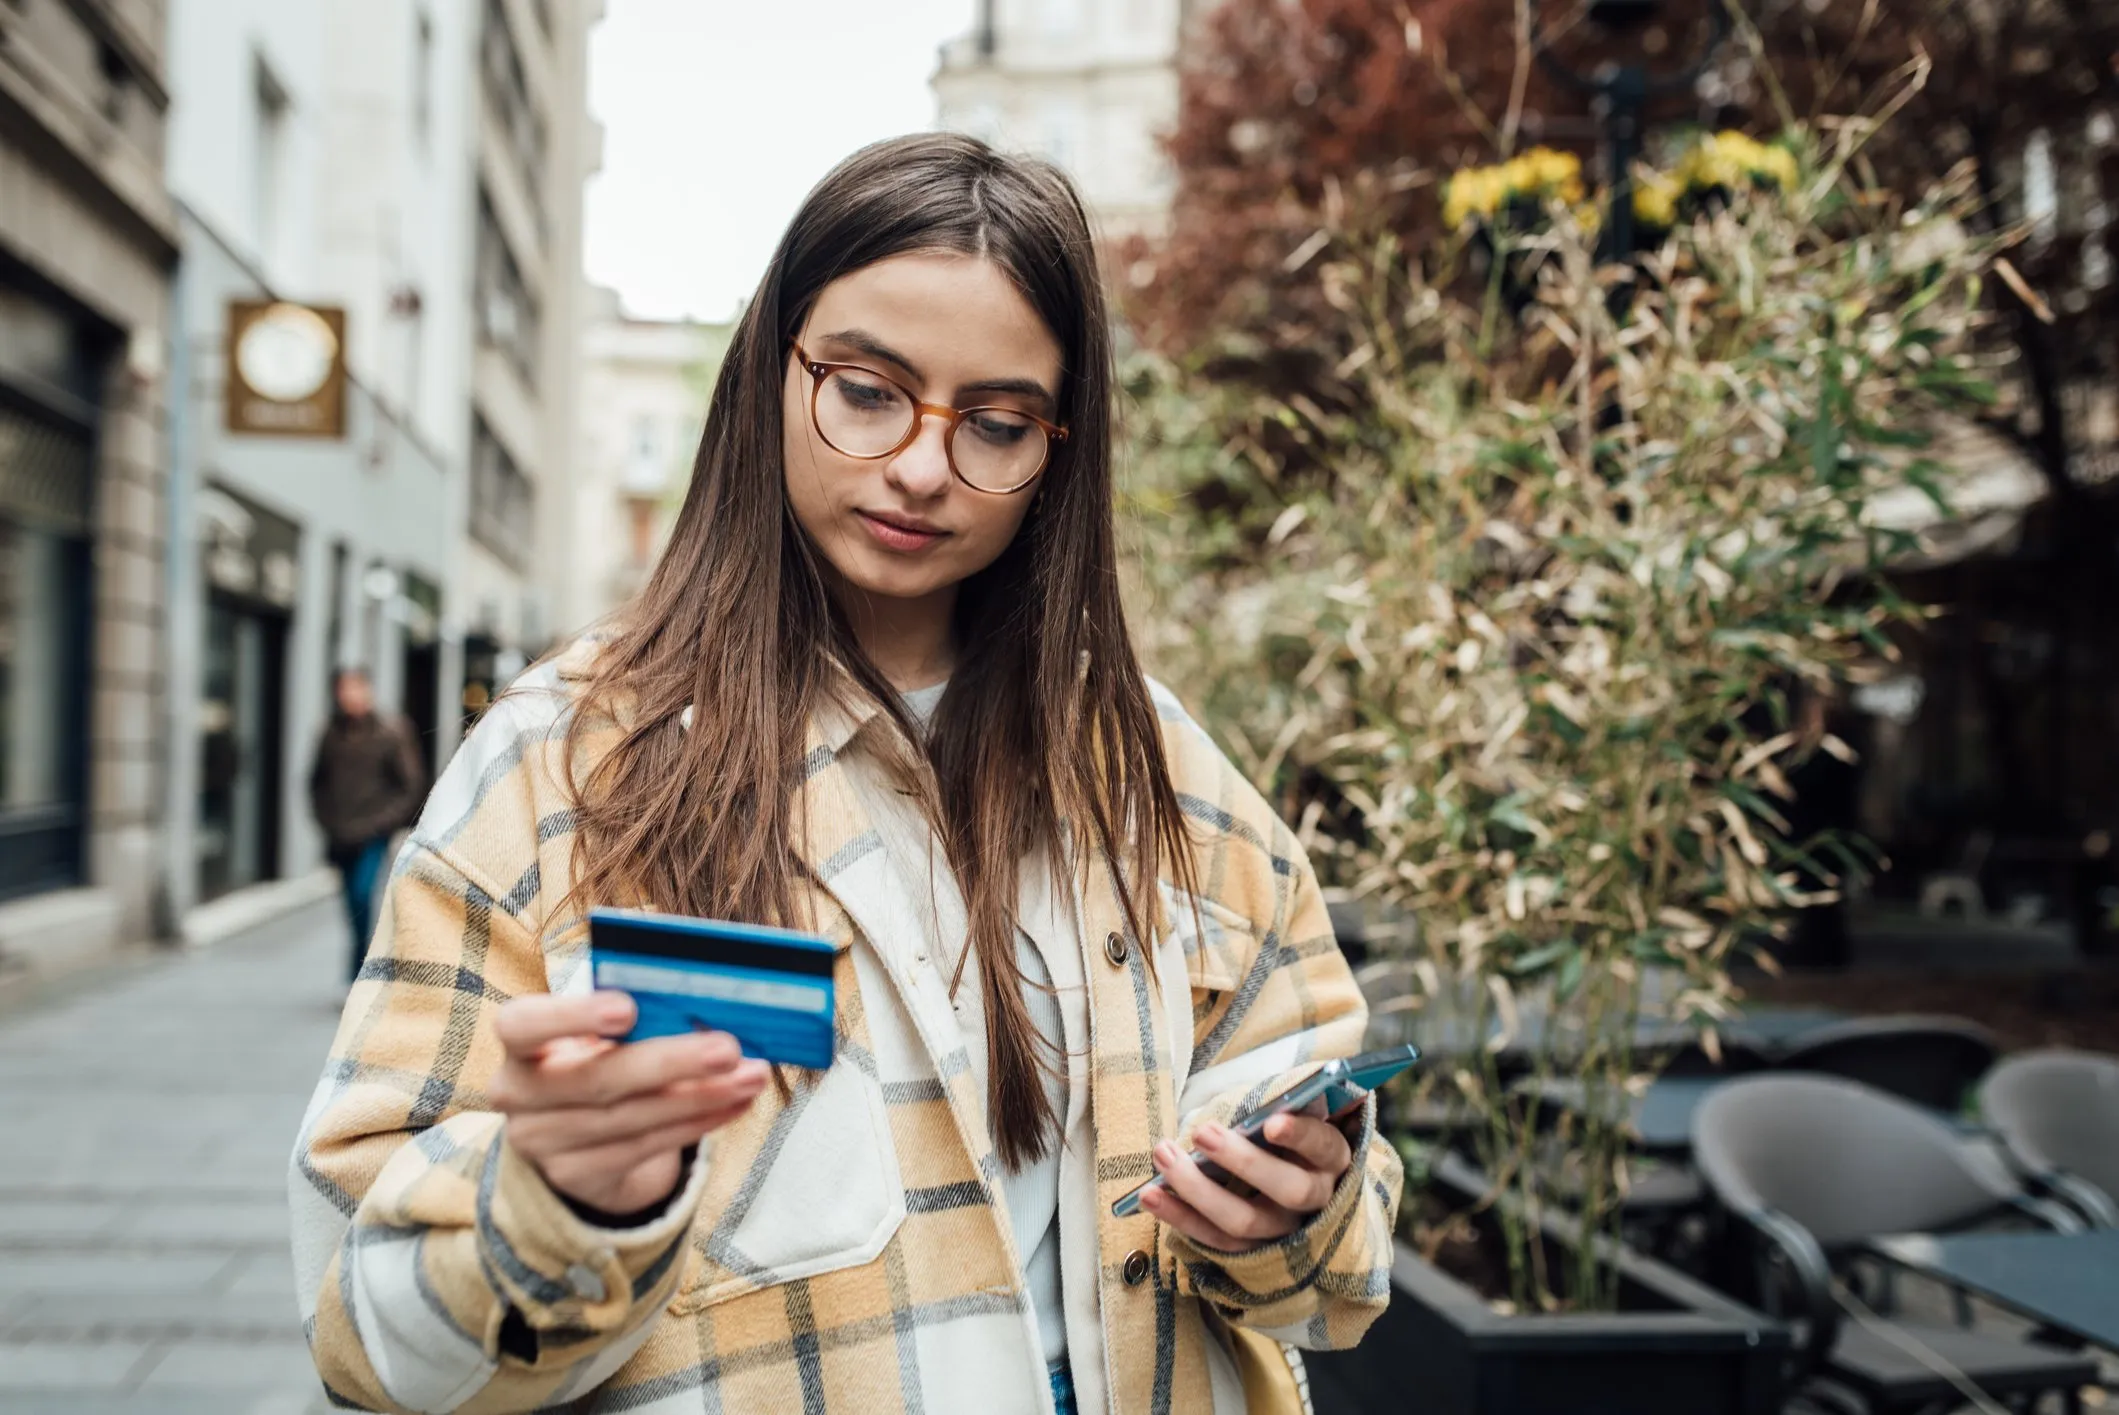 A college student holding her credit card and using a smartphone while walking in the city